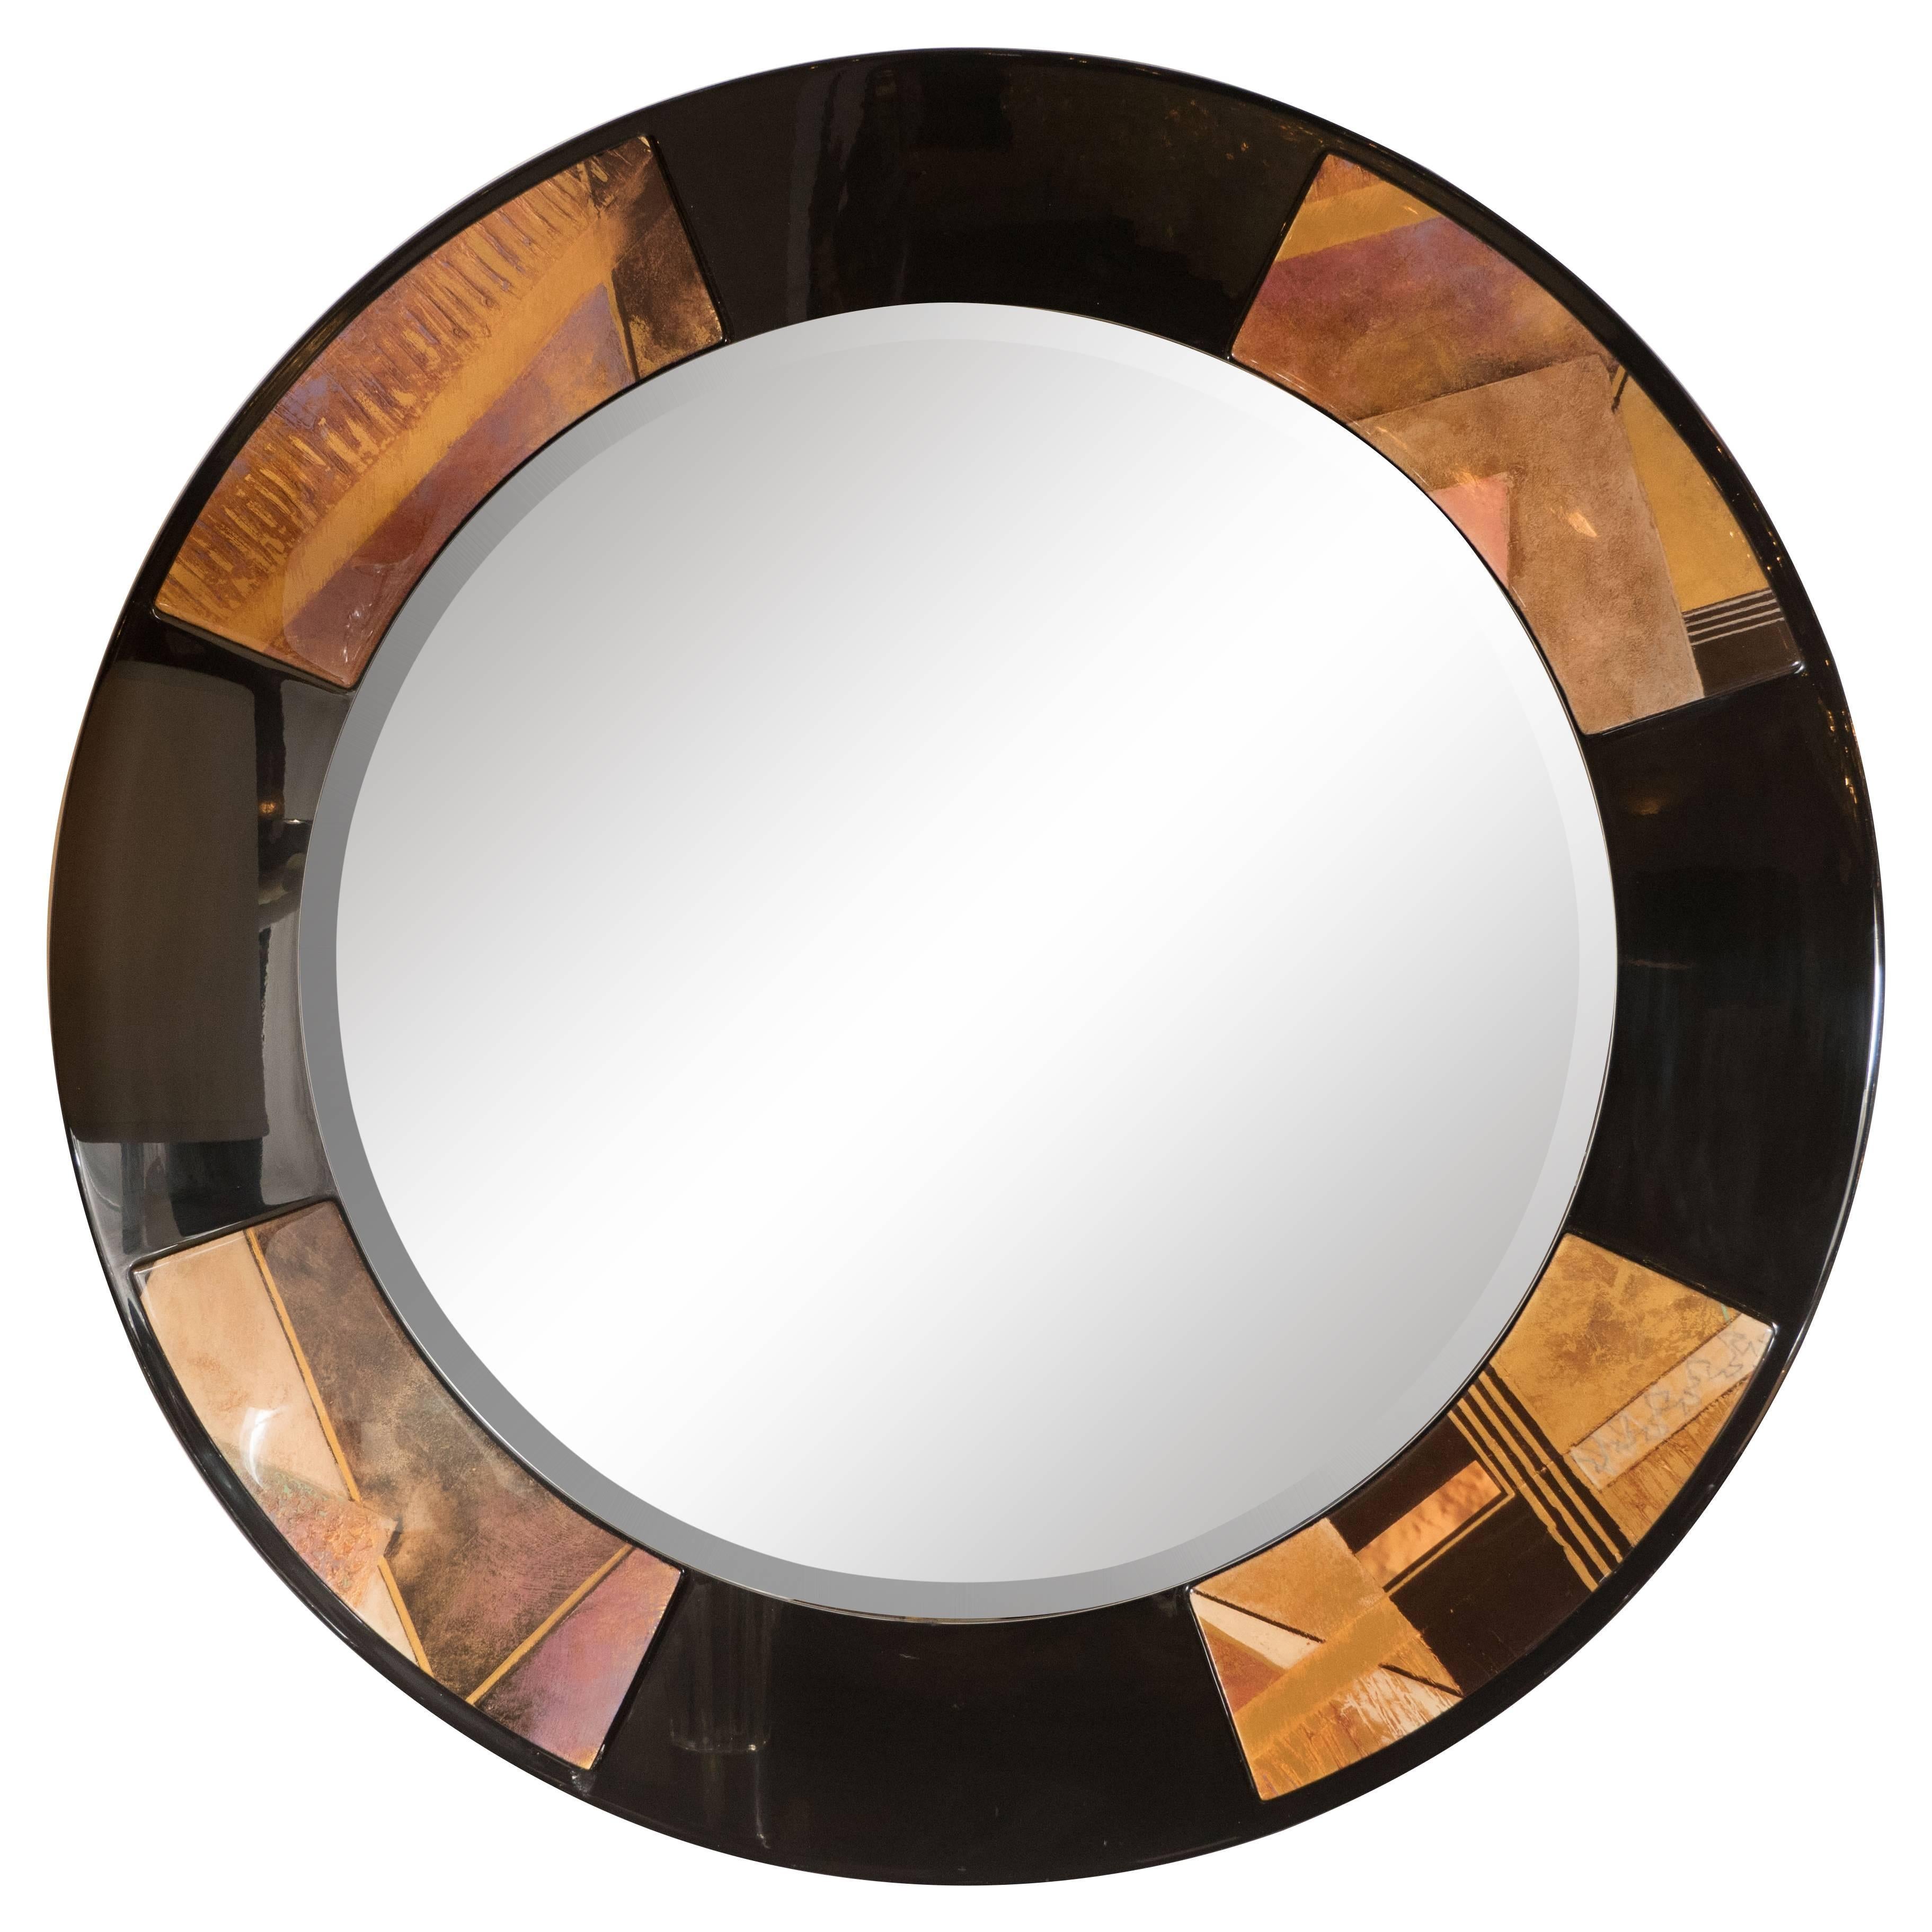 Circular Art Deco Revival Mirror in Black Lacquer with Patterned Acrylic Inlays